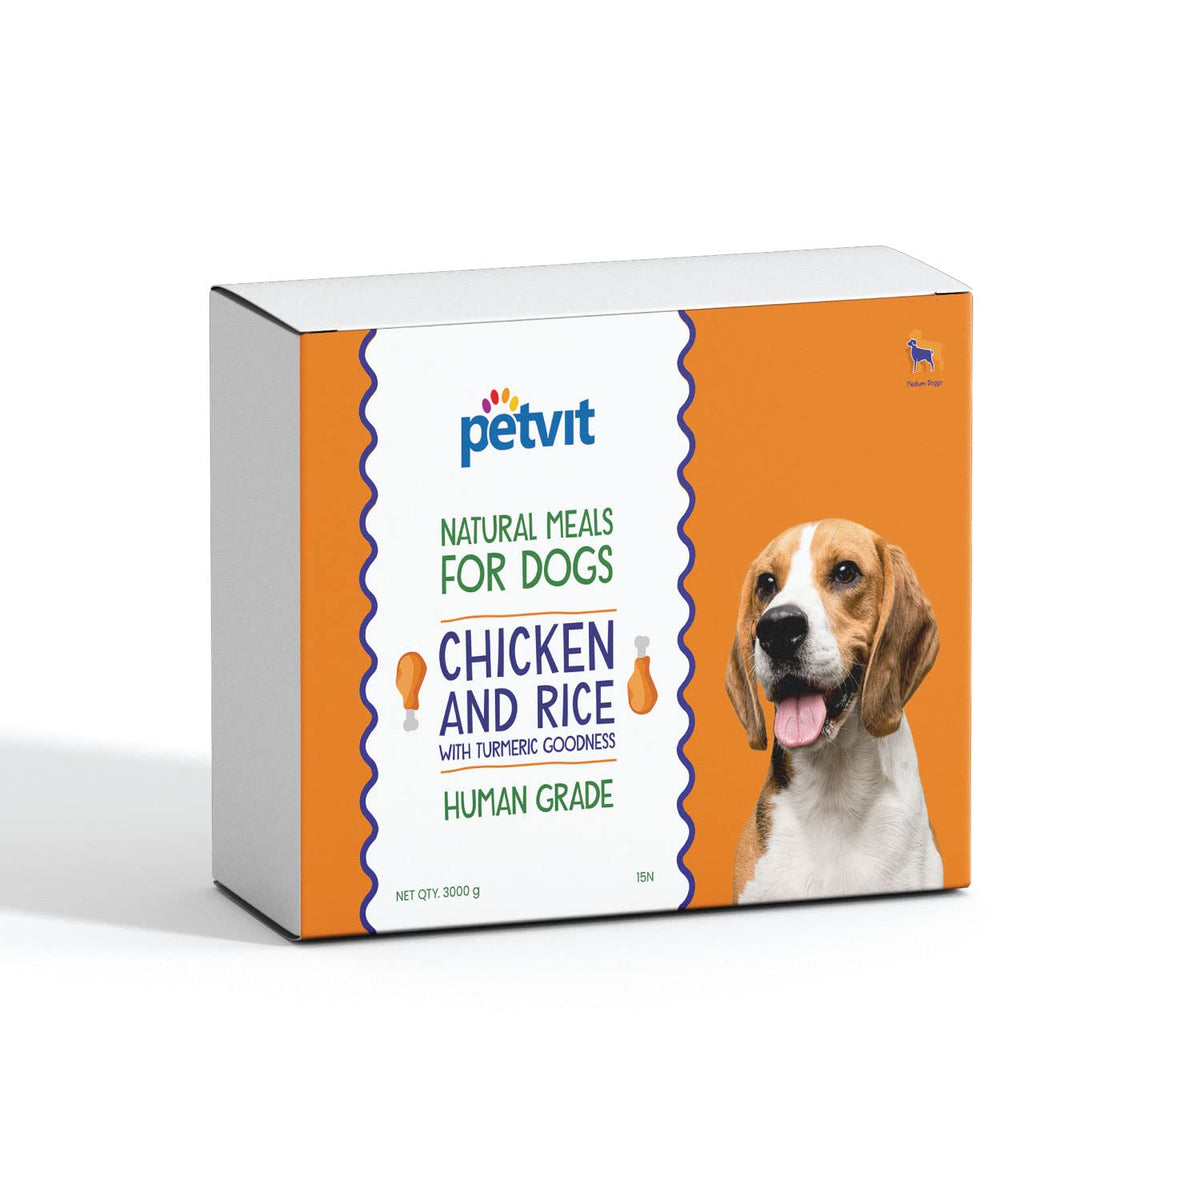 Petvit Natural Meal for Dogs - Chicken Rice with Turmeric (15 Pack, 200g Each) - Healthy and Nutritious Dog Food